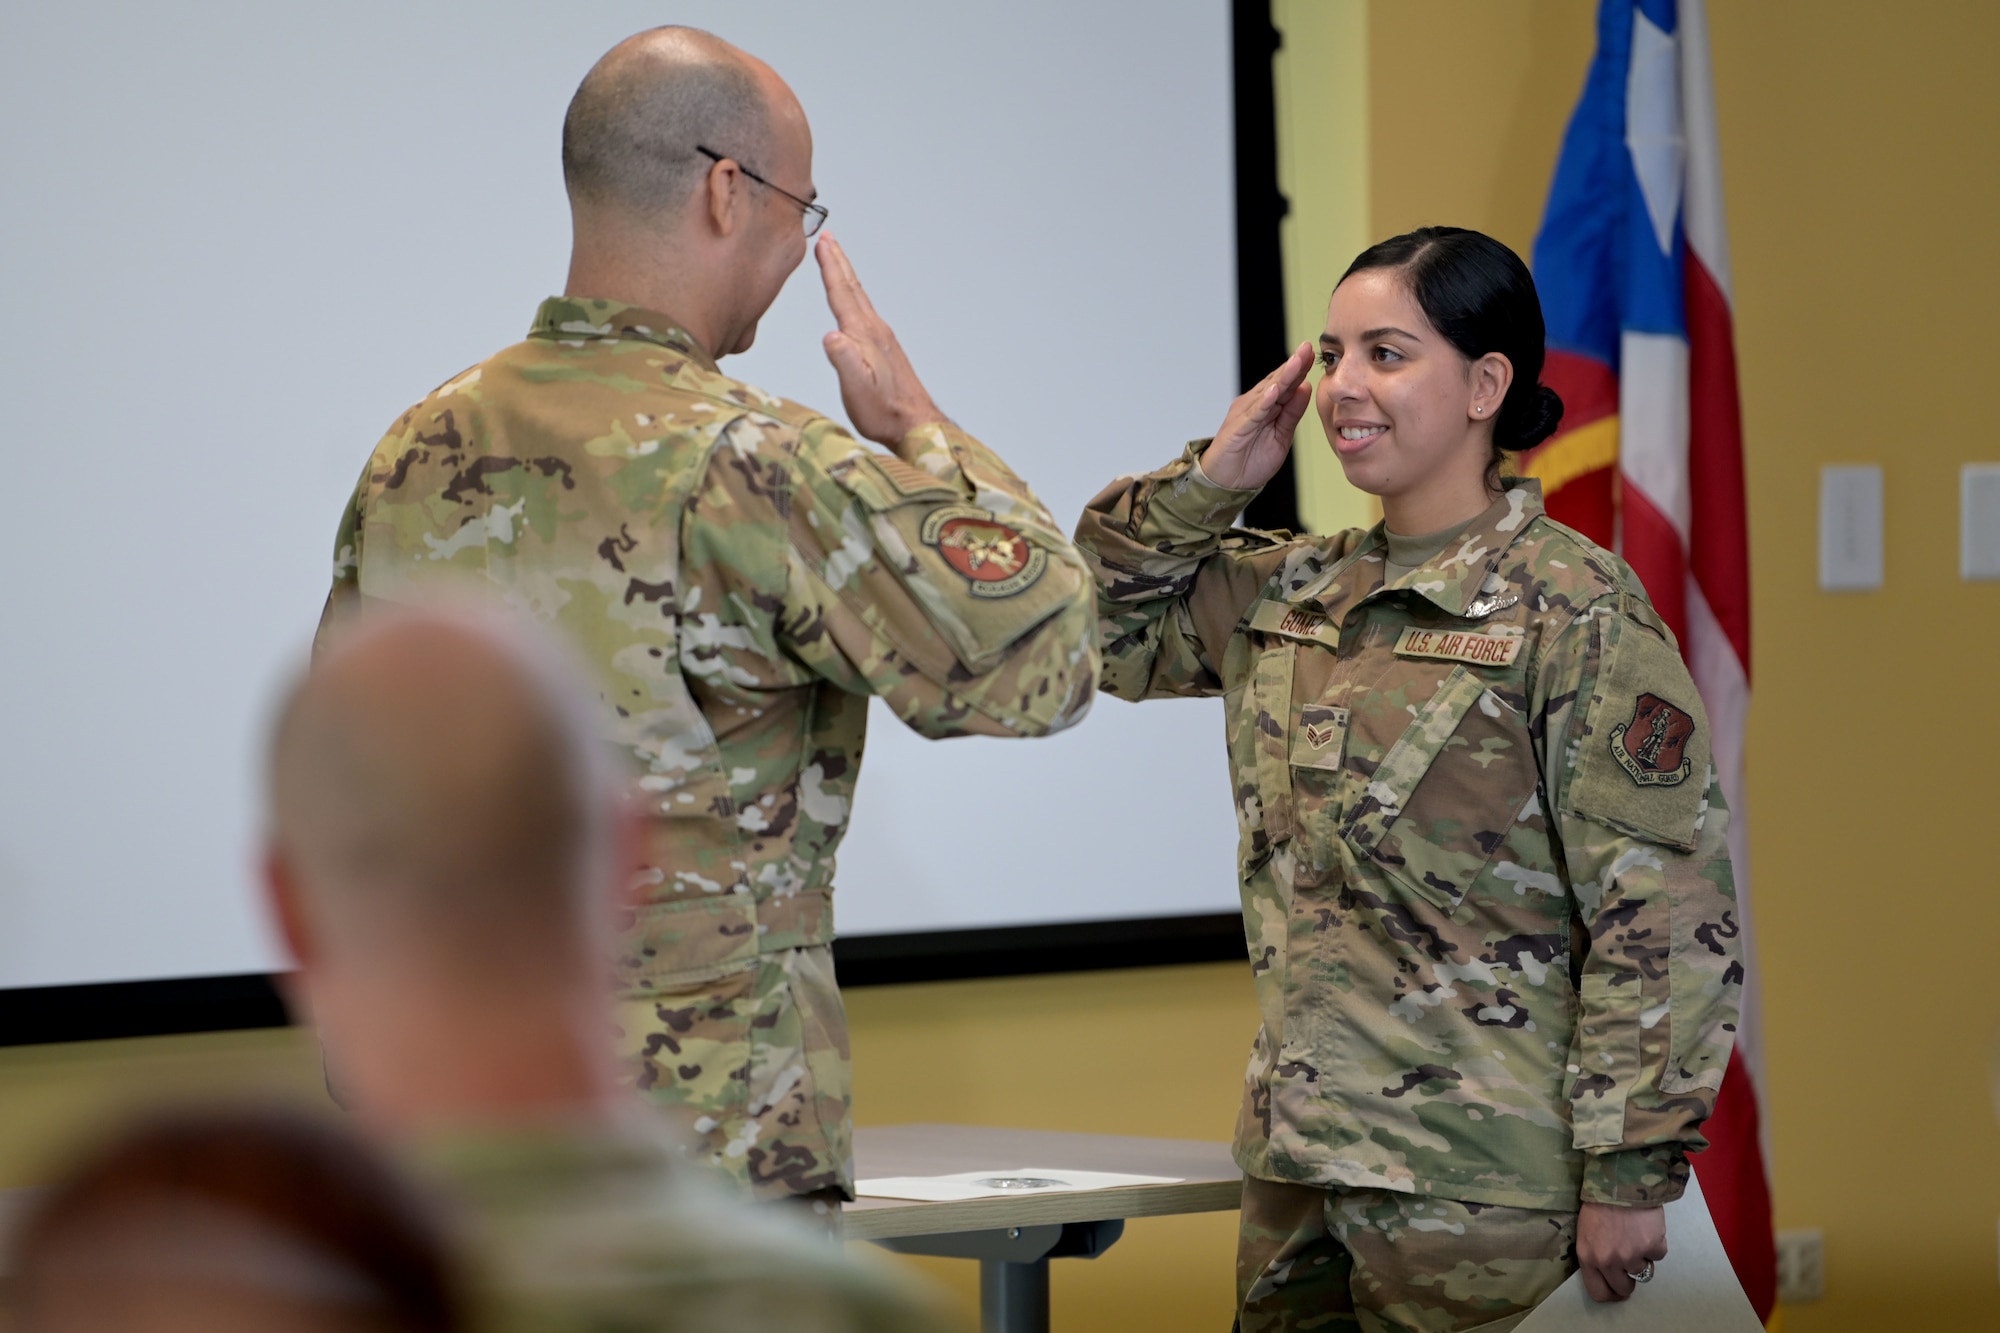 U.S. Senior Airman Amanda Gomez, with the 156th Operations Group, Host Nation Rider Flight, salutes Lt. Col. Raul Nieves, the 156th HNR officer in charge, after receiving his diploma for completing the Basic Airborne Mission Systems Operator course, May 25, 2021 at the 156th Wing, Muñiz Air National Guard Base, Puerto Rico. The nine Airmen that graduated the course are the first qualified Host Nation Rider BAMSOs in the Puerto Rico Air National Guard. (U.S. Air National Guard photo by Master Sgt. Caycee Watson)